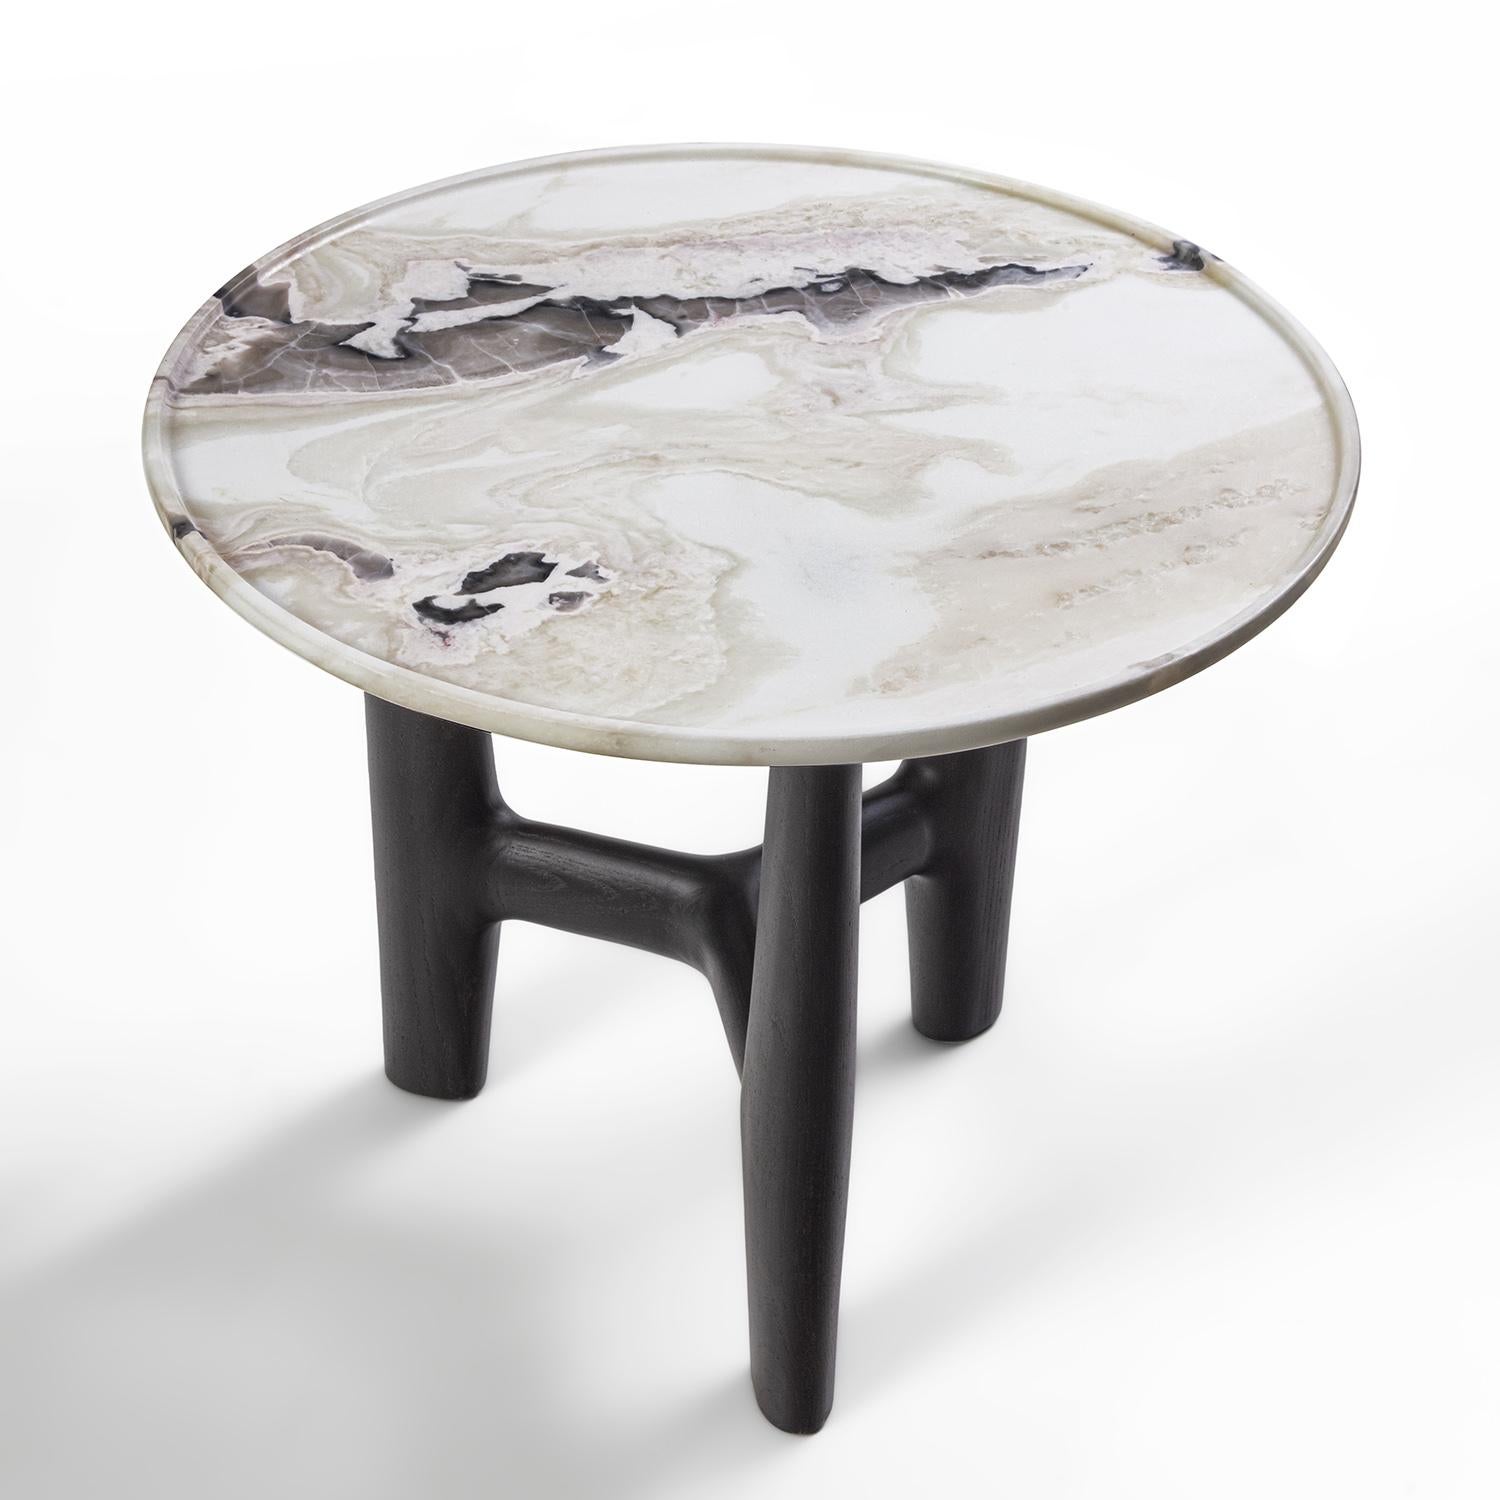 Side Table Logi Marble with solid walnut base
in wenge stained finish, with Dover white polished
marble top.
Also available on request with solid walnut base
in natural finish.
Also available on request with grey marble top, 
price: 5650,00€.